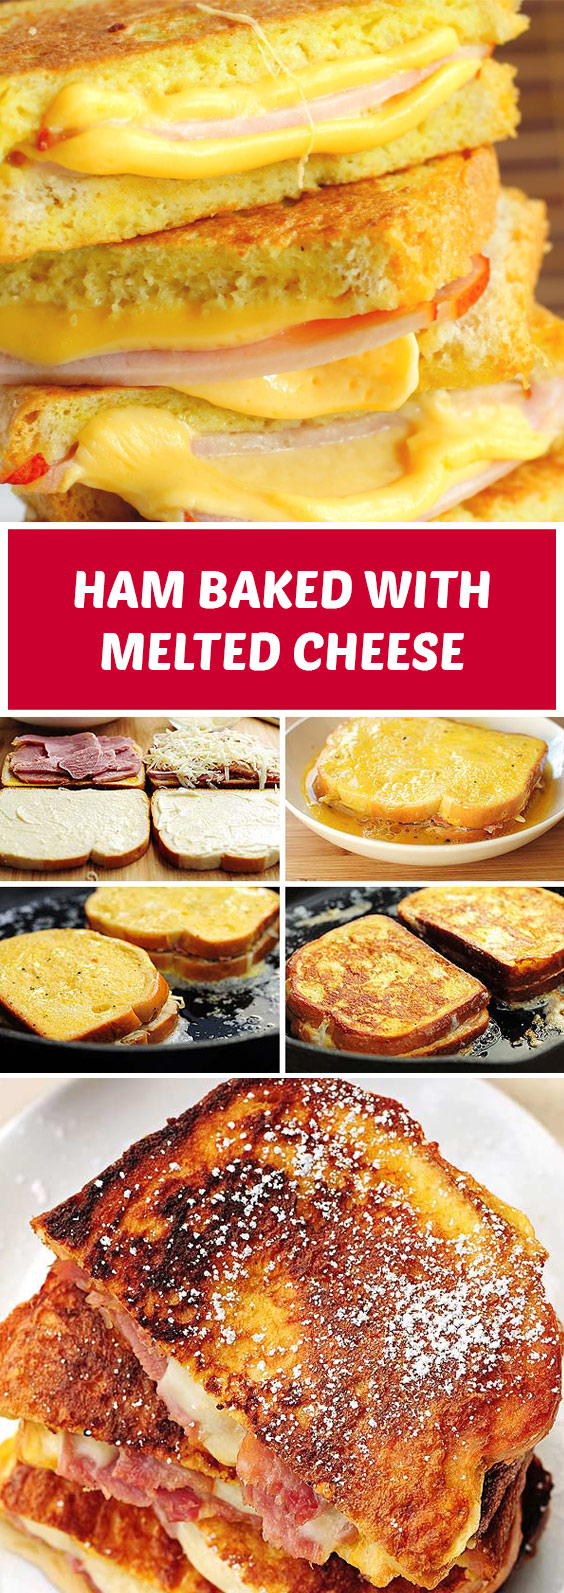 Ham Baked with Melted Cheese